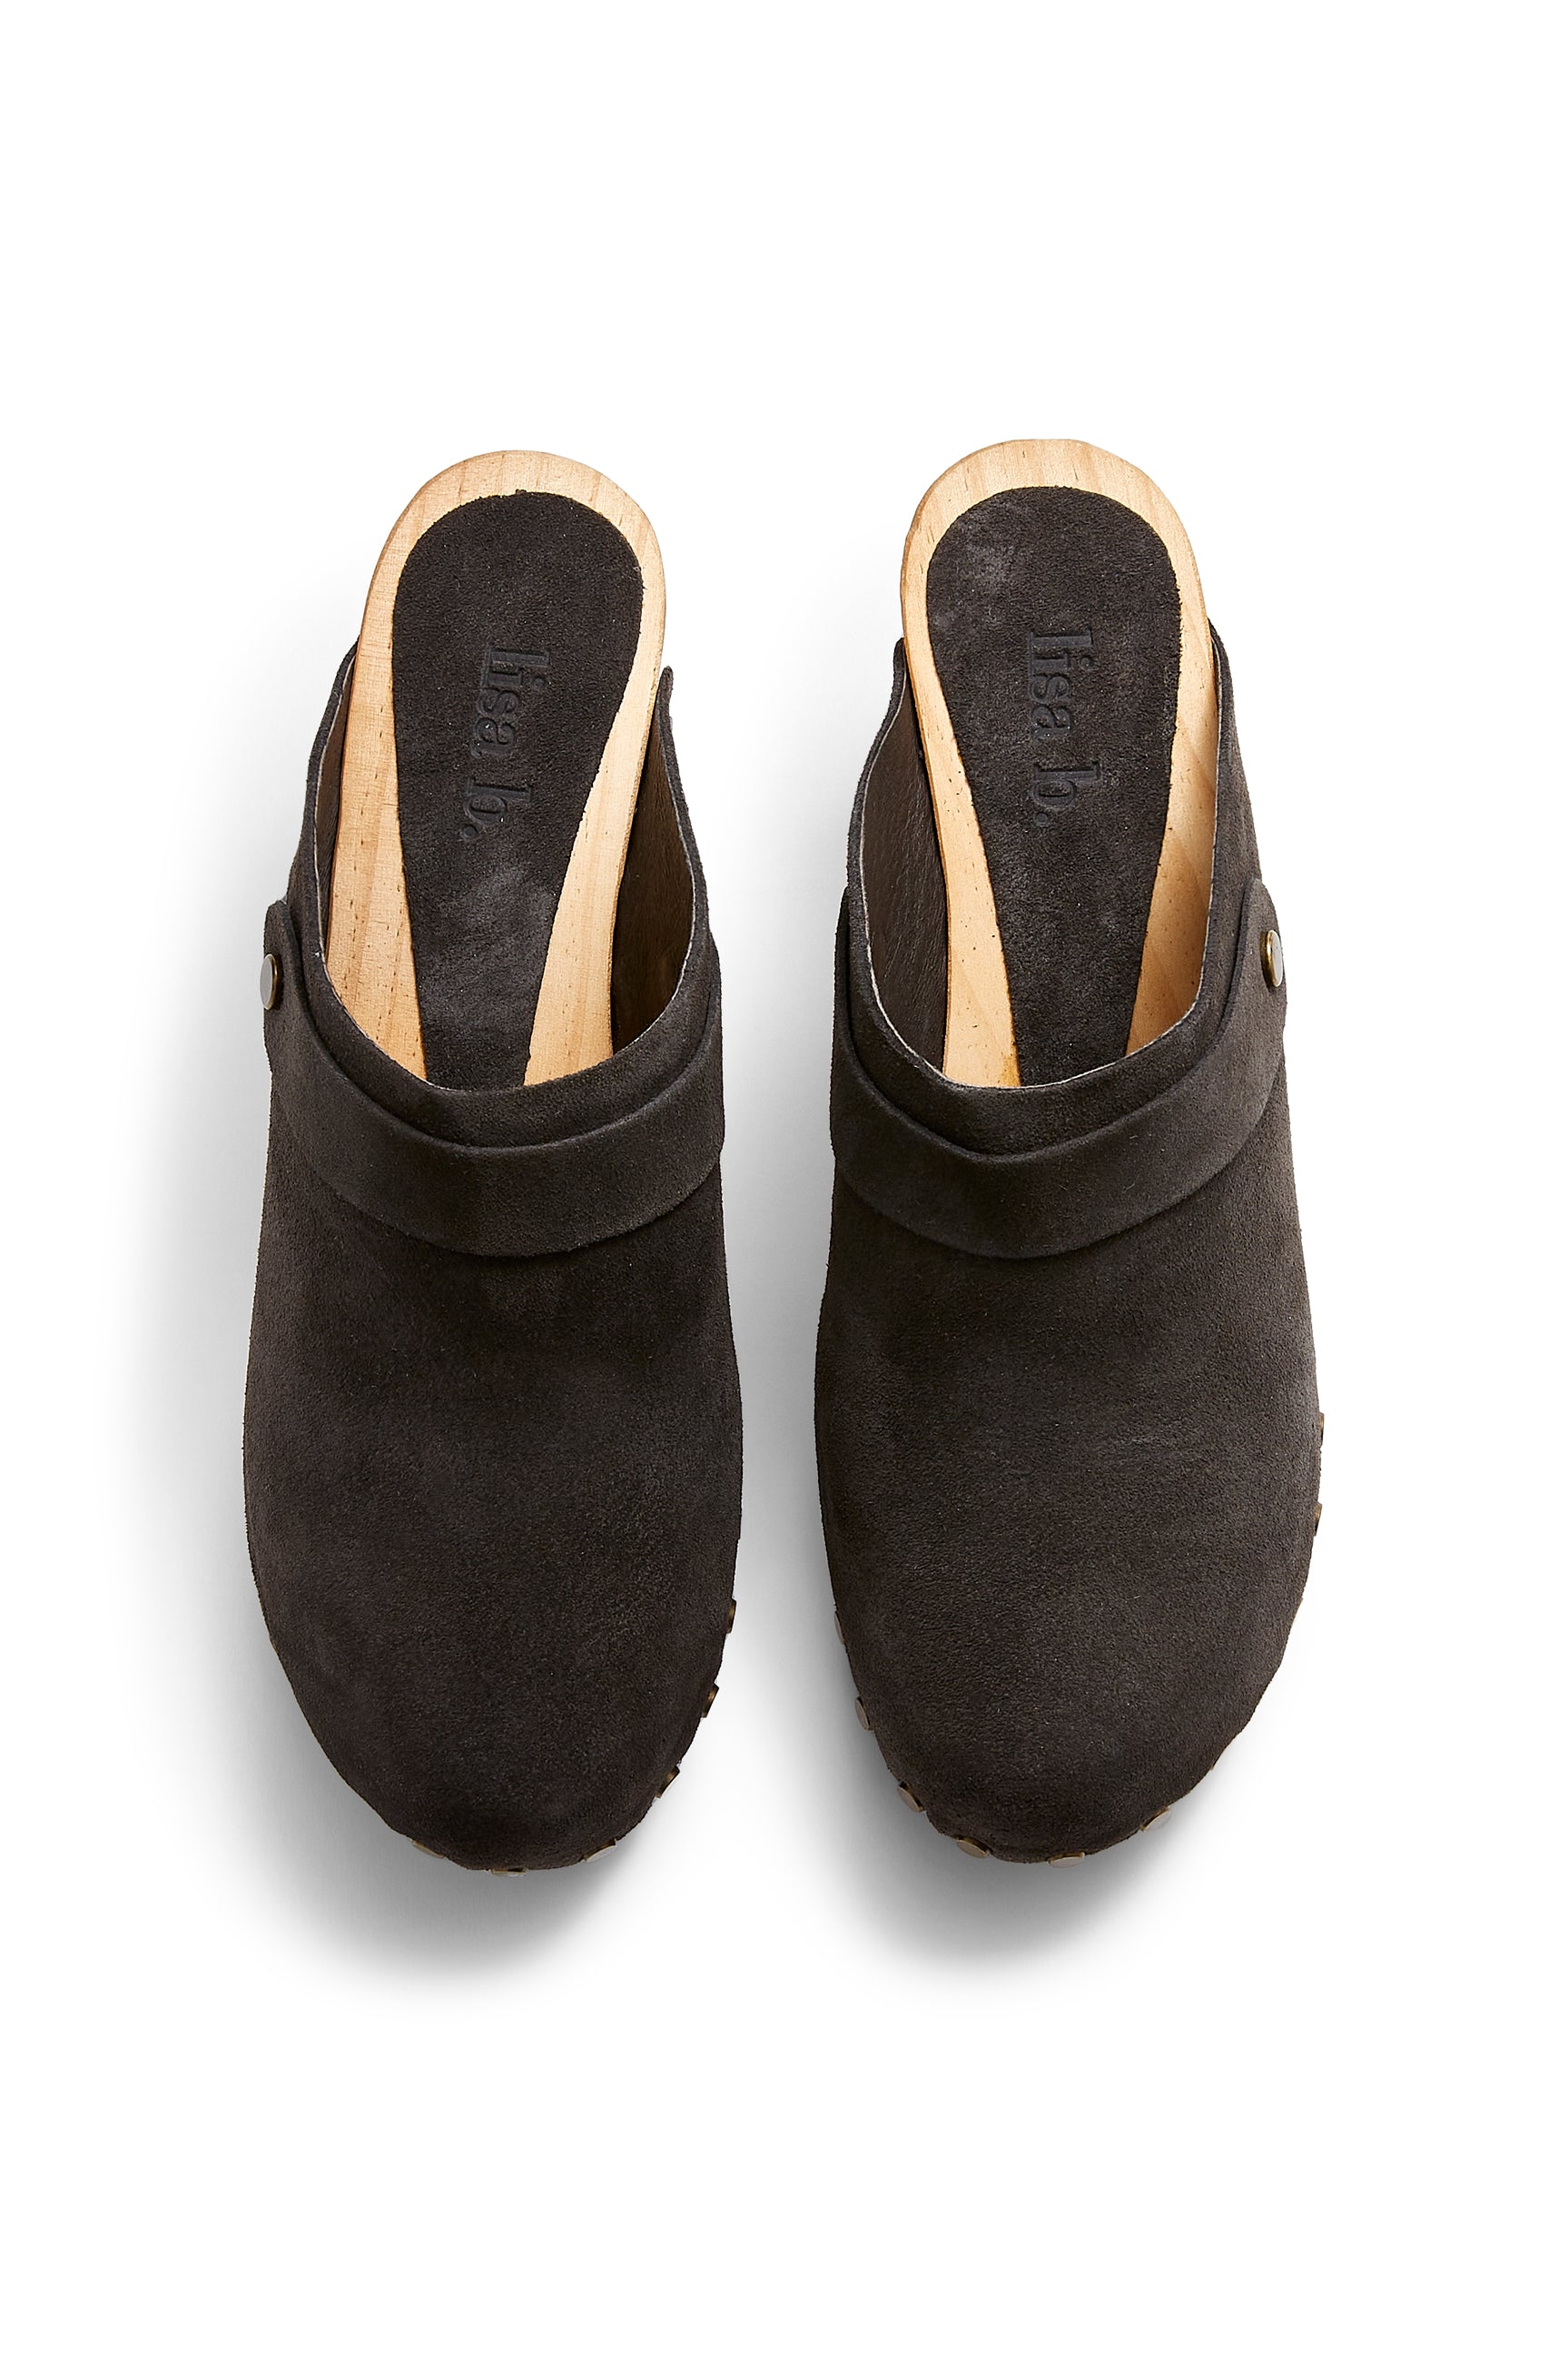 high heel classic clogs in coal suede - ships end of April Clogs lisa b. 